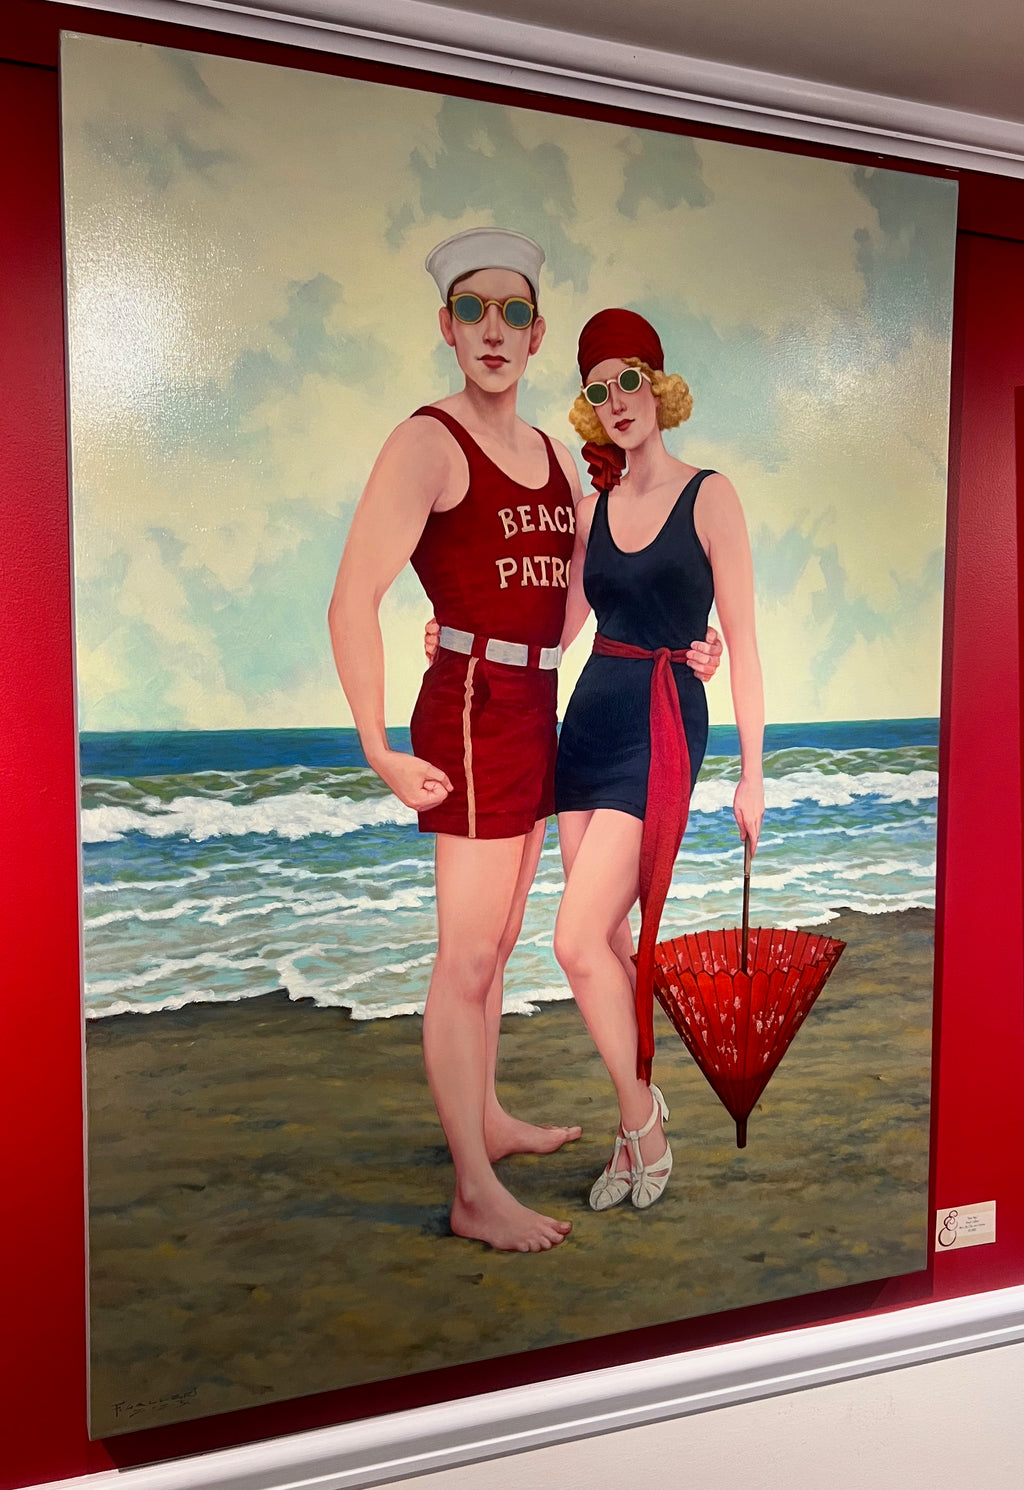 Oil painting of a man and woman in vintage bathing suits and red parasol standing on the shore of a beach